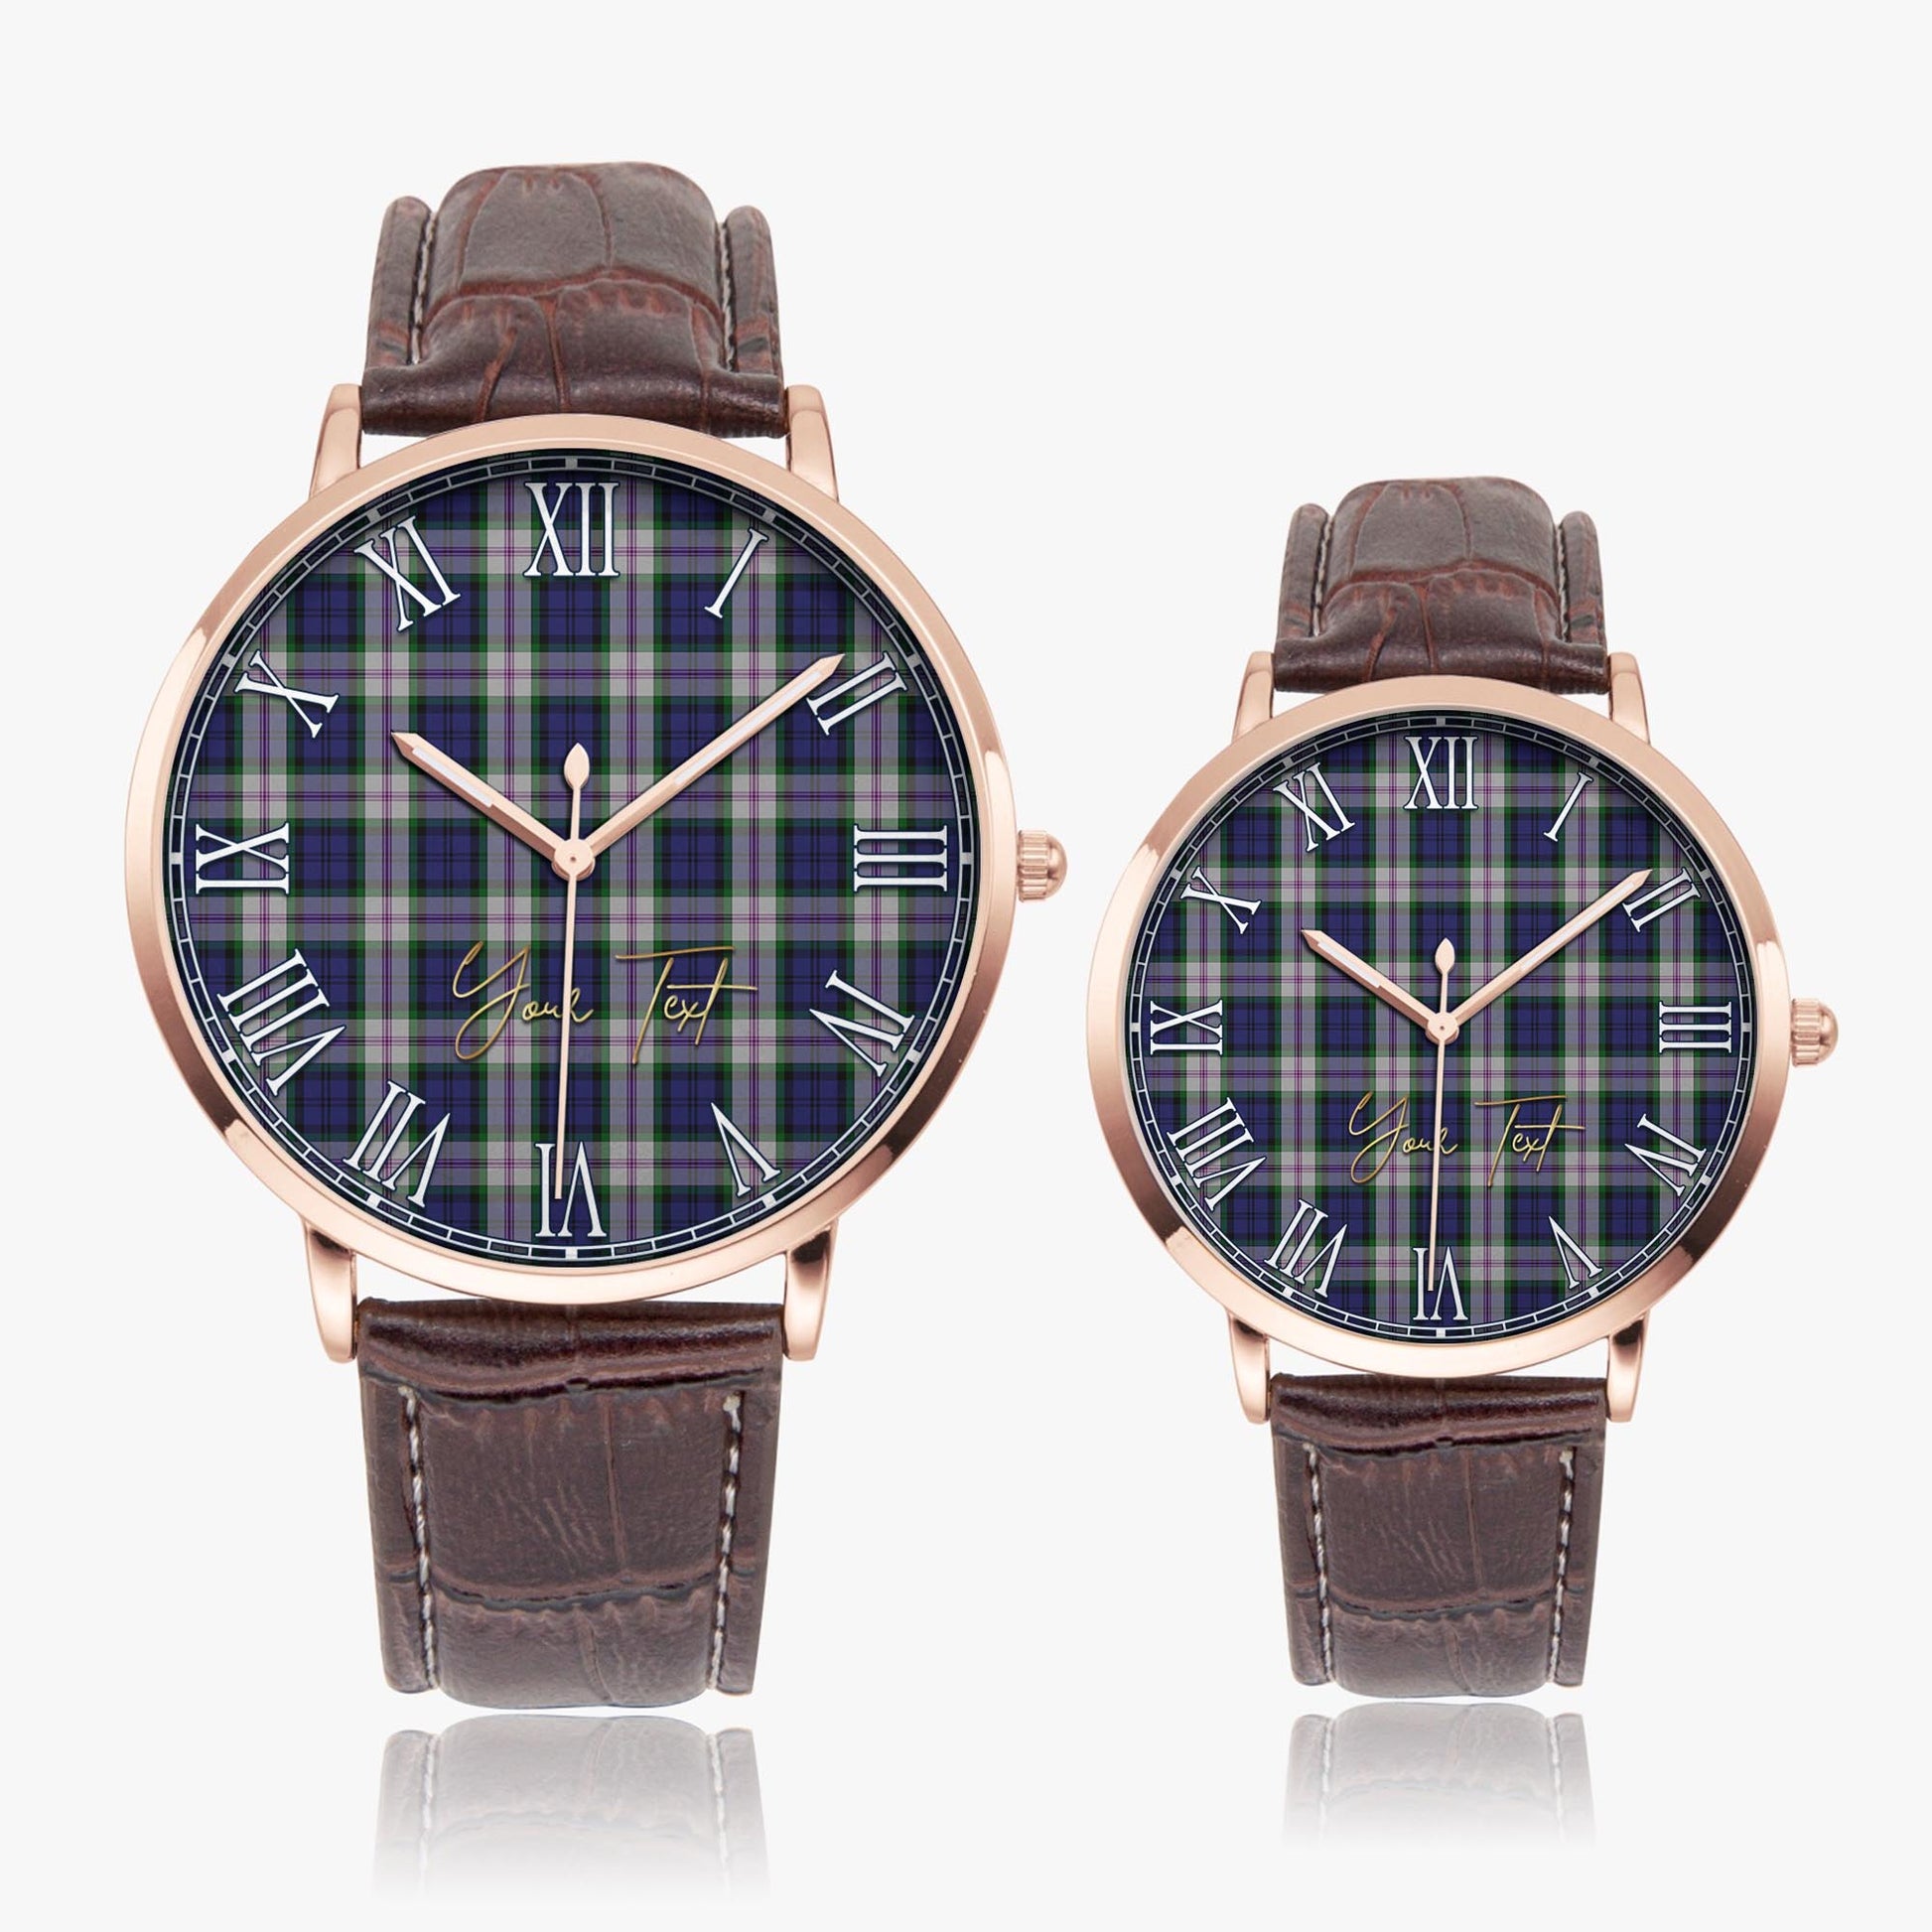 Baird Dress Tartan Personalized Your Text Leather Trap Quartz Watch Ultra Thin Rose Gold Case With Brown Leather Strap - Tartanvibesclothing